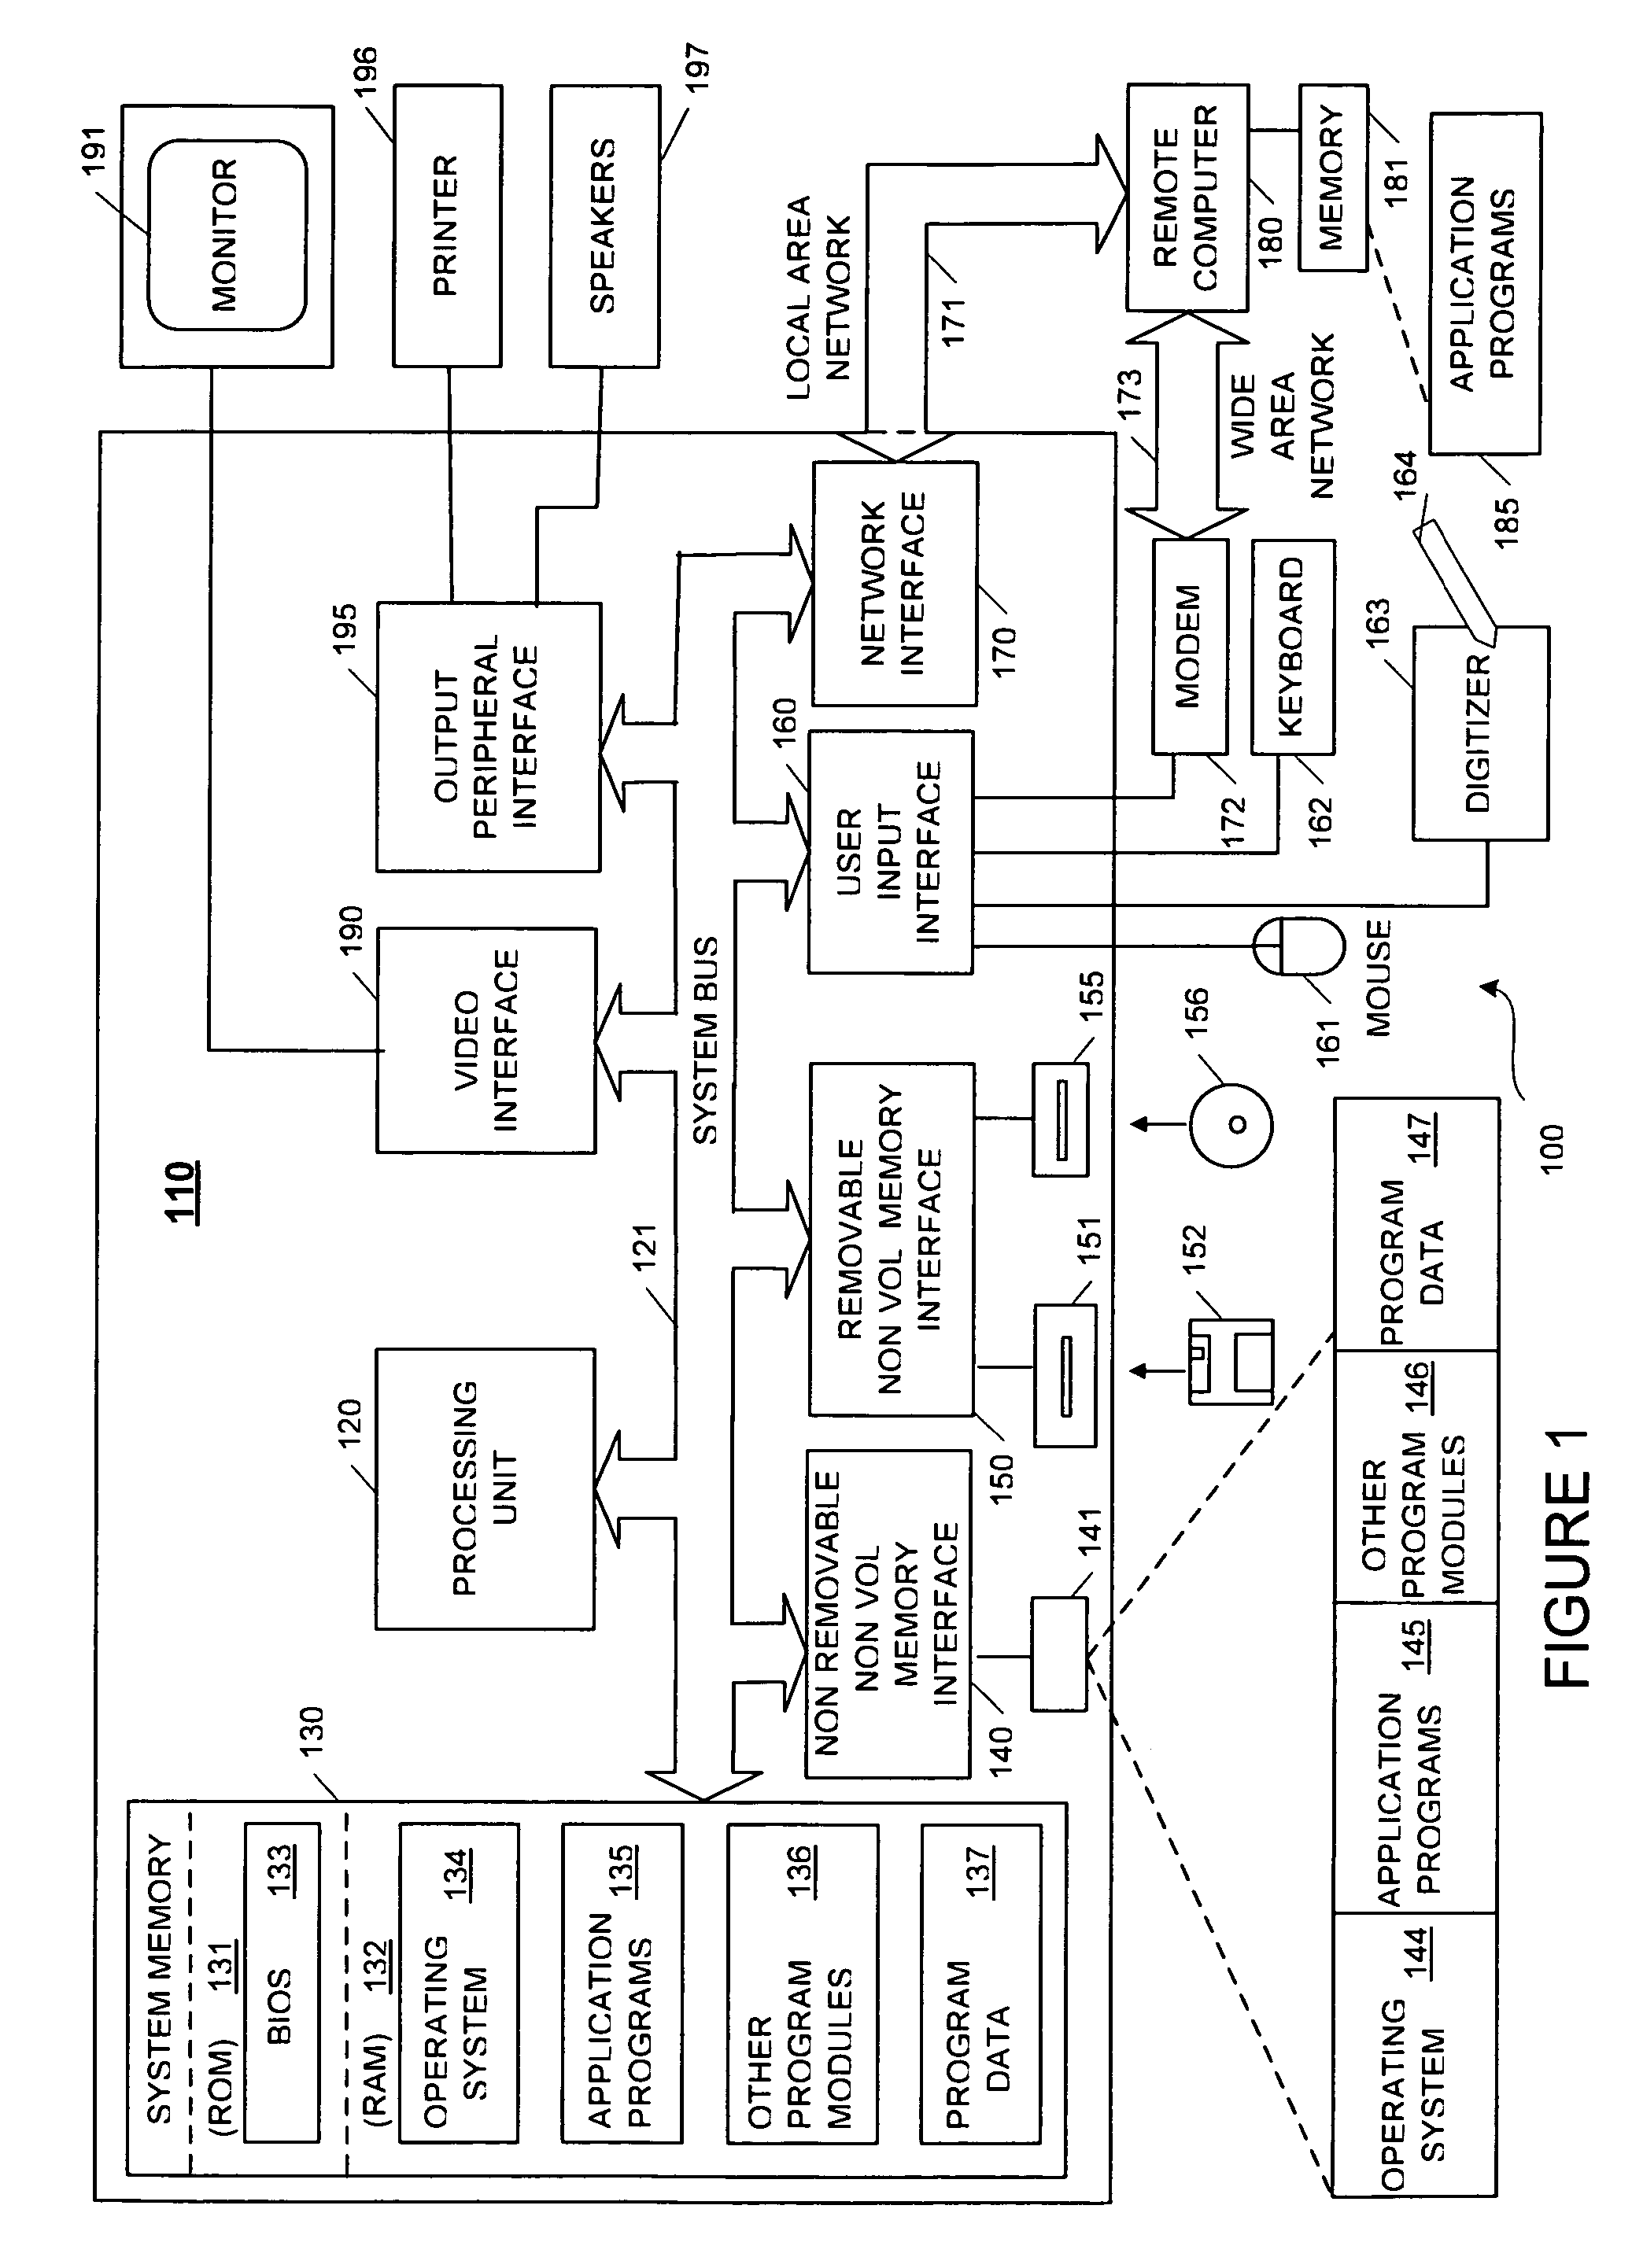 Universal computing device for surface applications